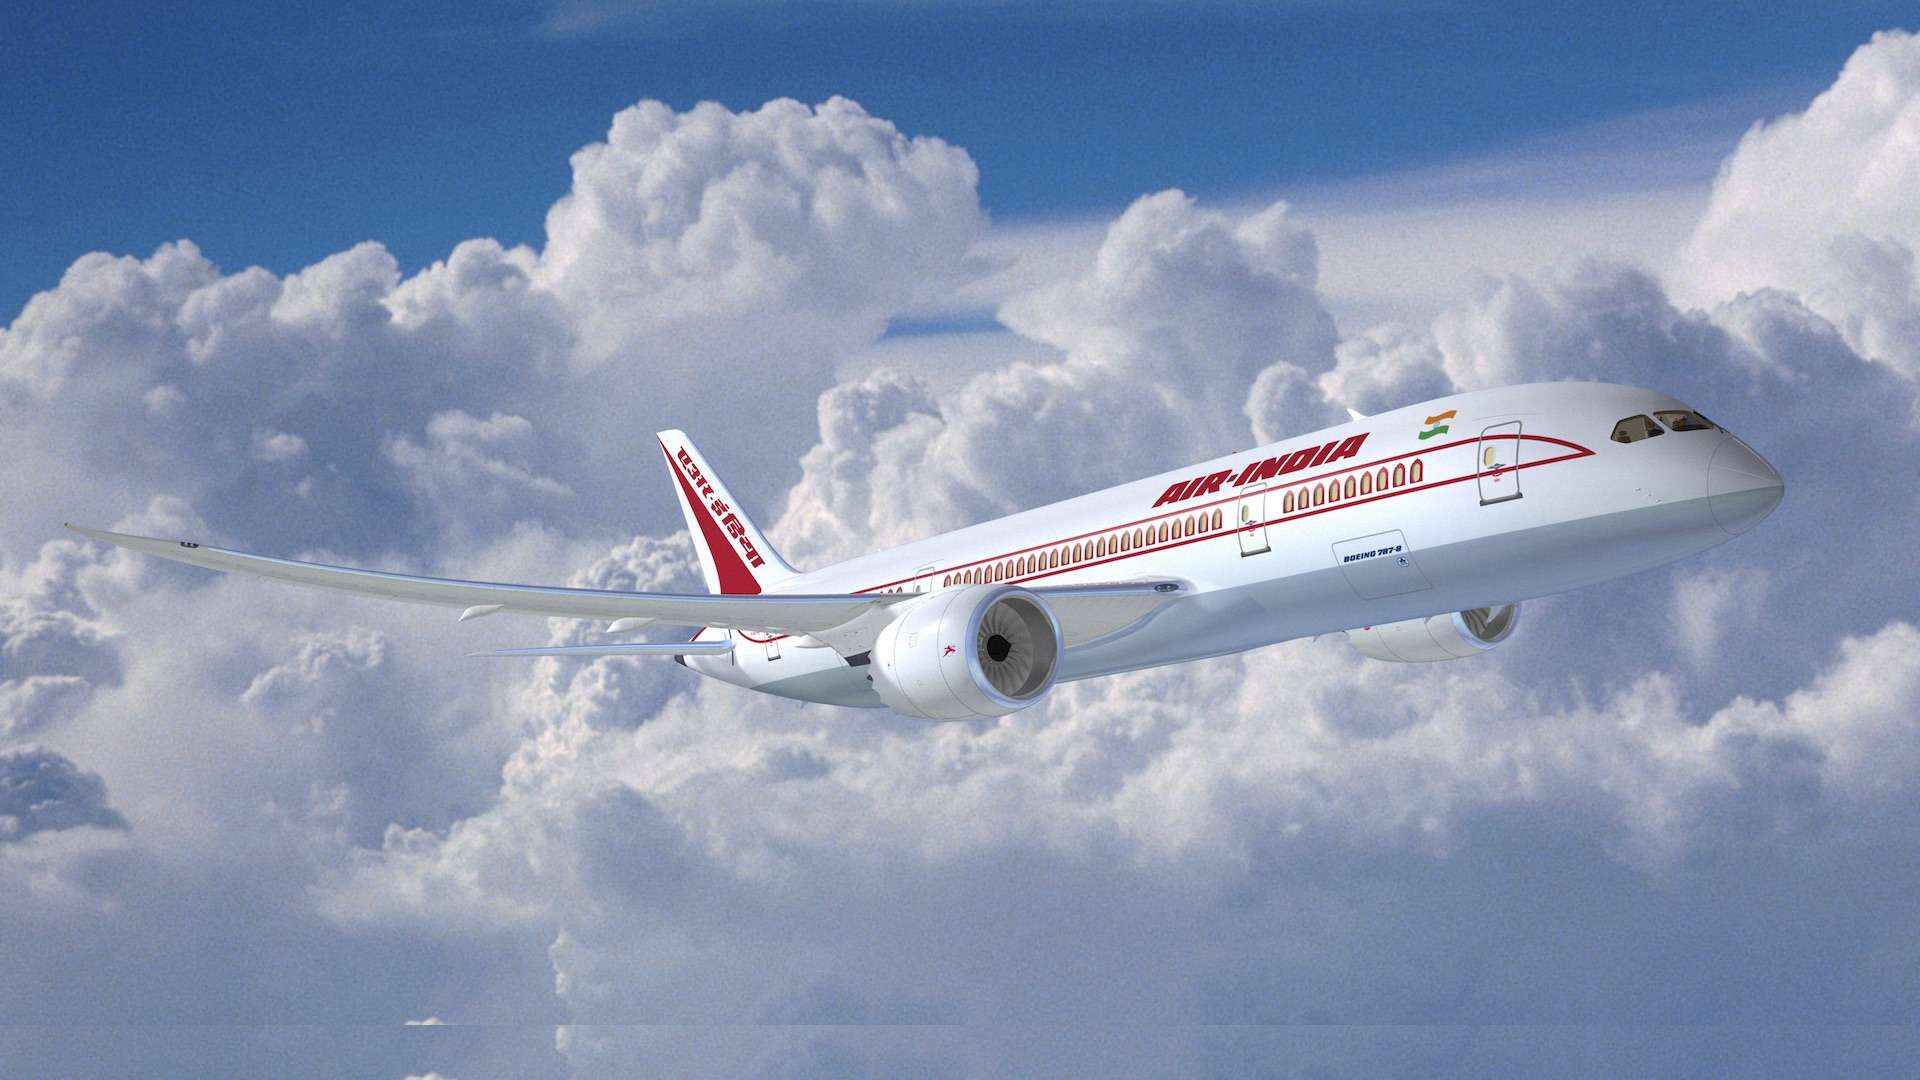 Air India is set to finalize an order for 150 Boeing 737 Max jets